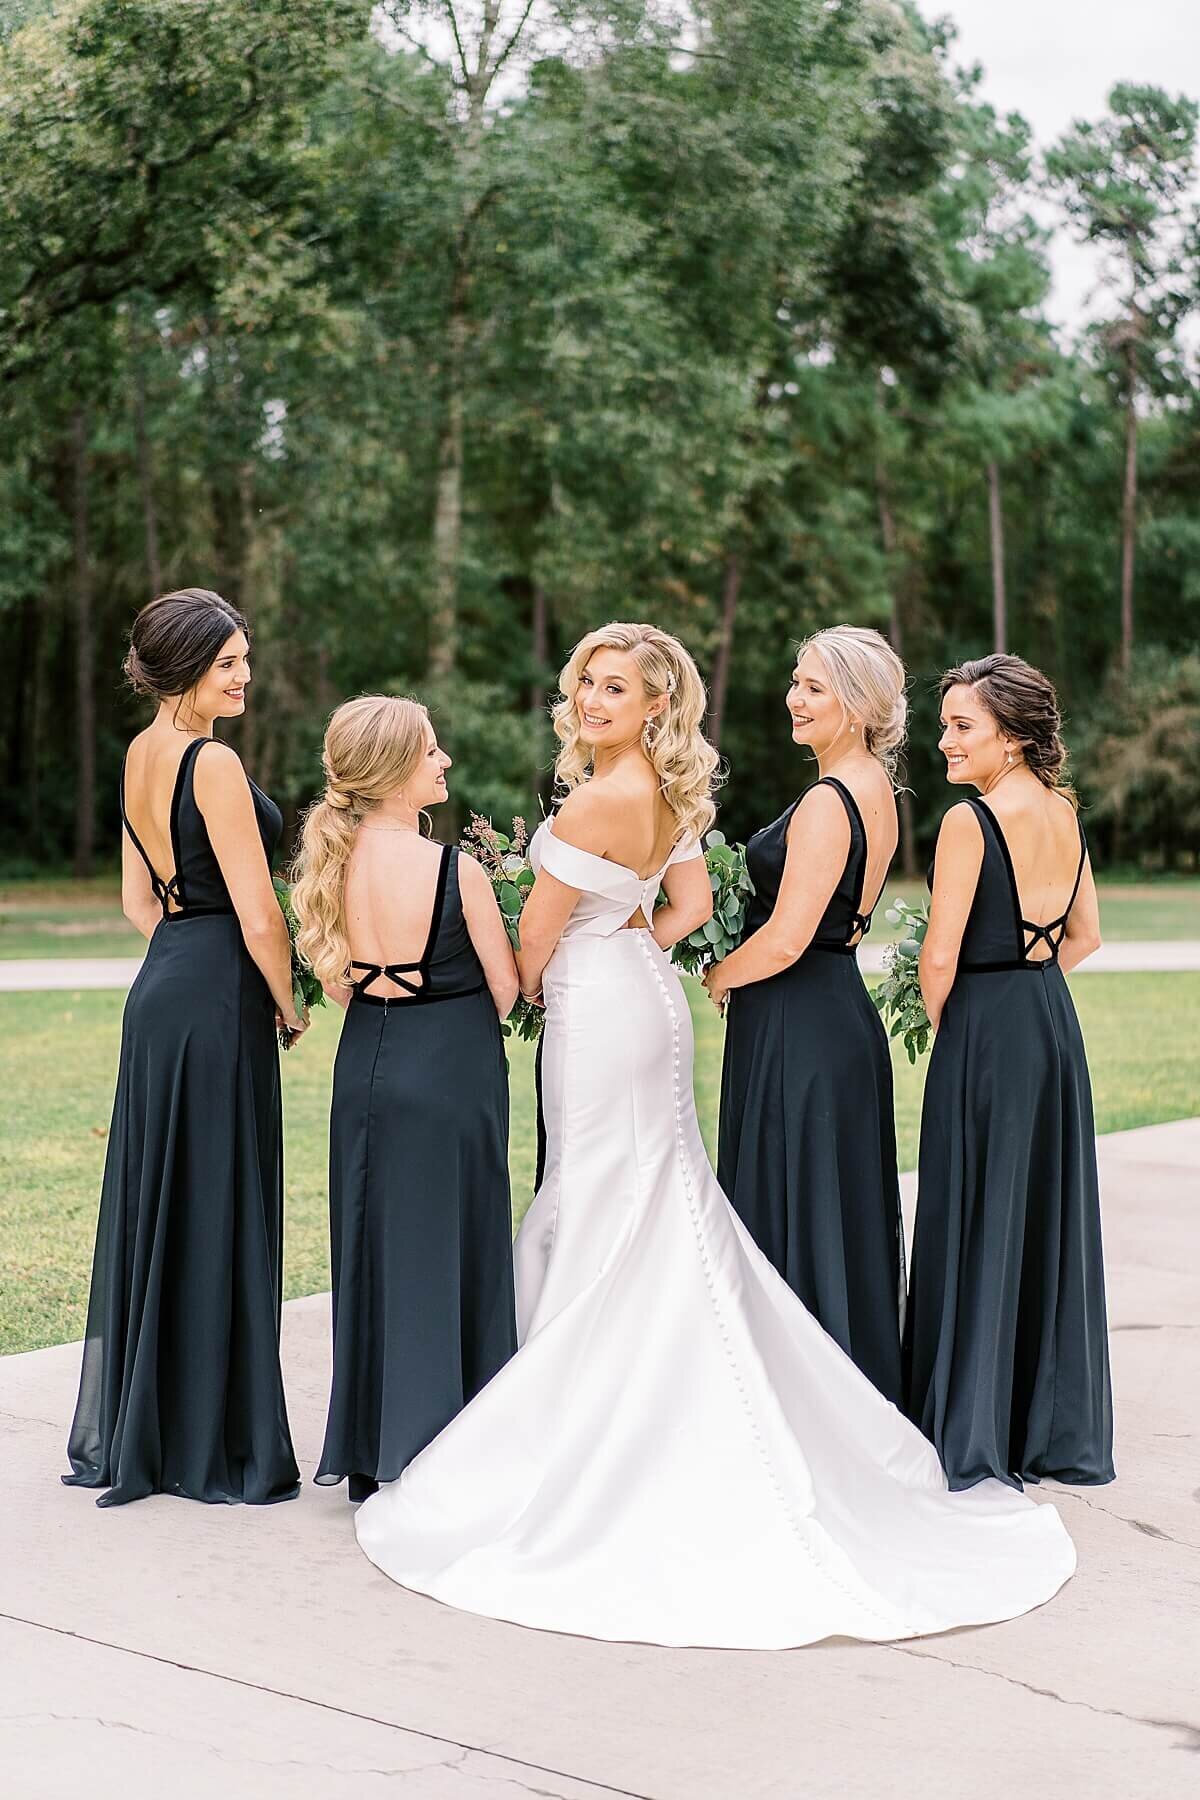 Bridal party portraits at black tie wedding at the Annex photographed by Alicia Yarrish Photography